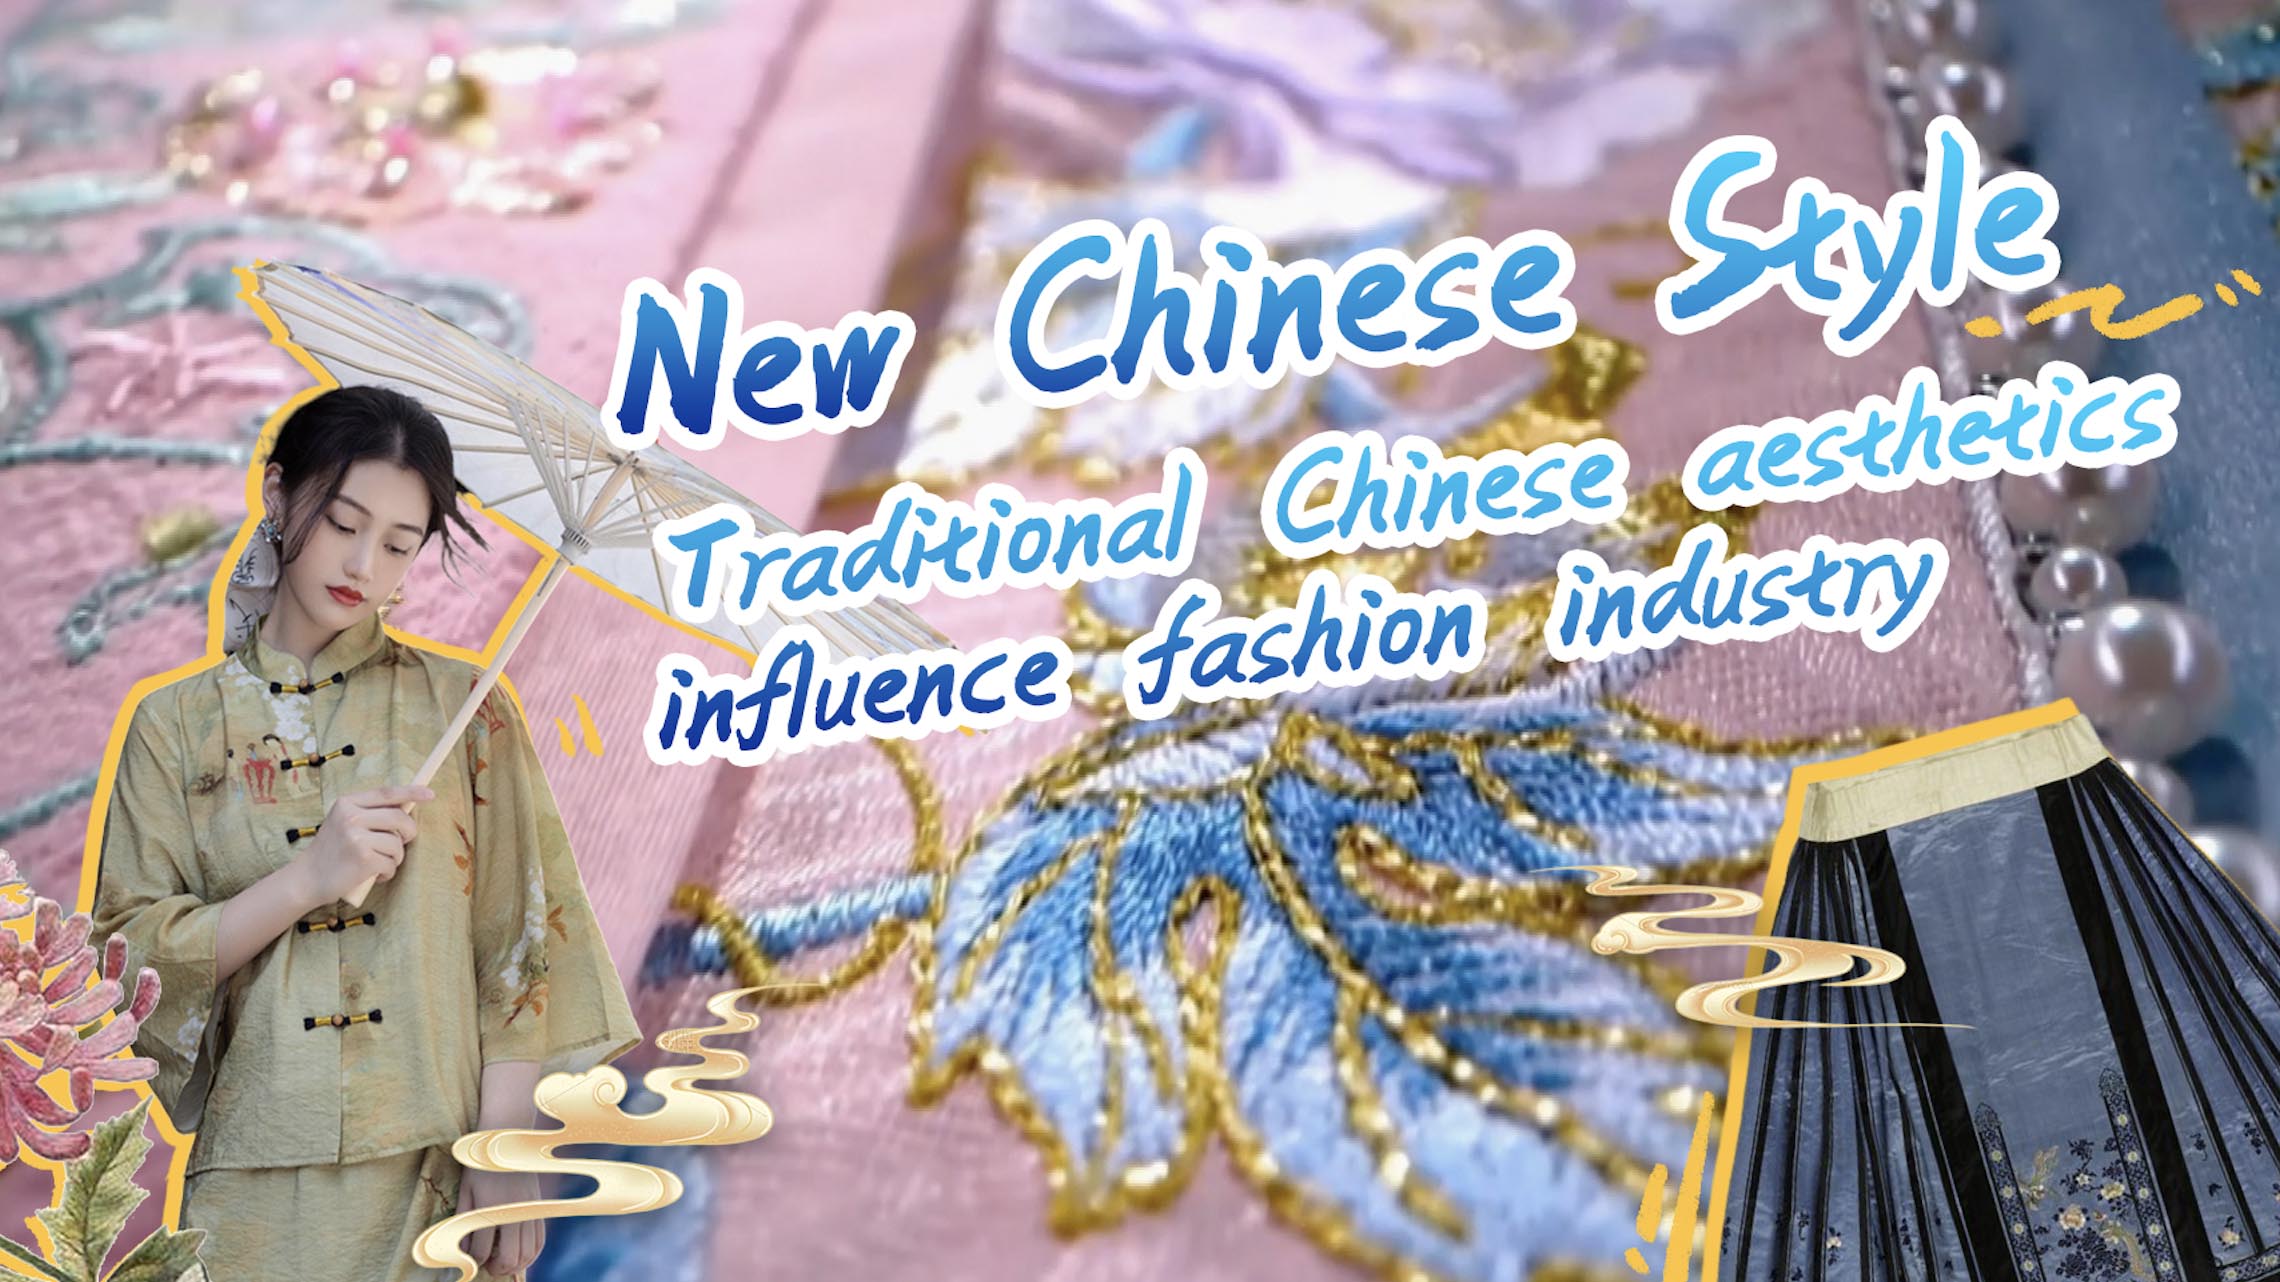 Chinese aesthetics influence the fashion industry